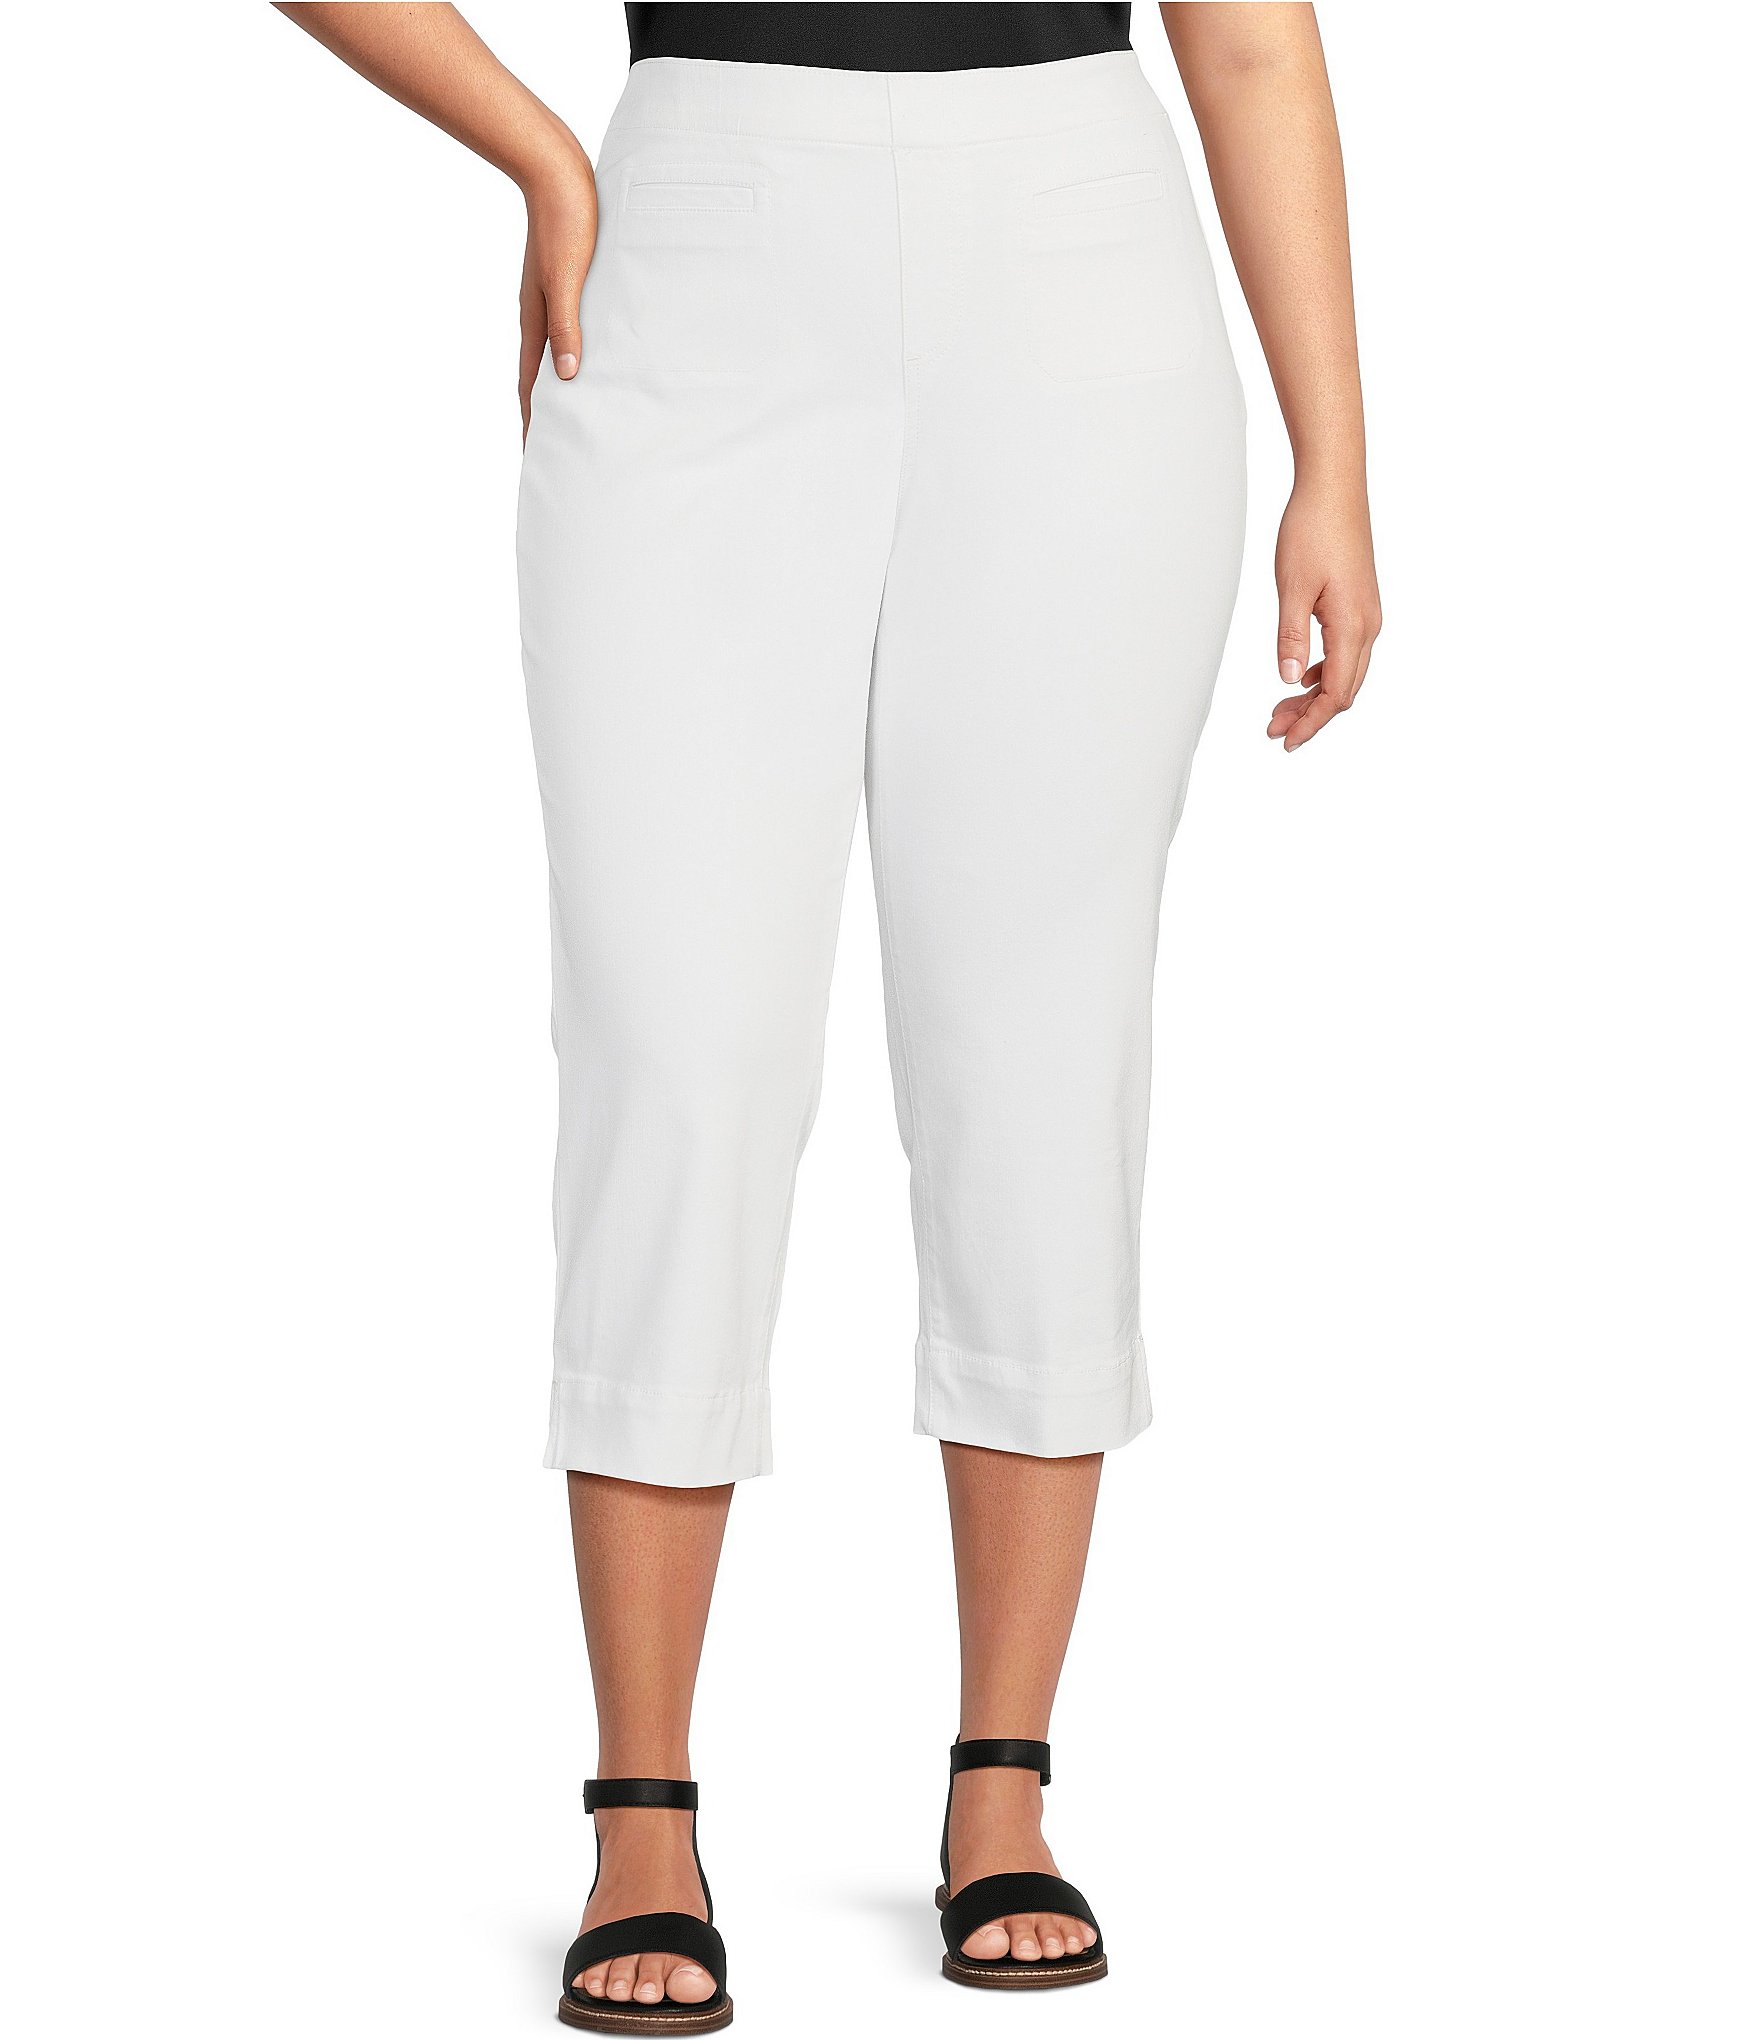 https://dimg.dillards.com/is/image/DillardsZoom/zoom/westbound-plus-size-high-rise-flat-front-pull-on-cropped-pant/00000001_zi_650d5bd4-e54e-4e3f-b3d1-8db6a3ecac24.jpg